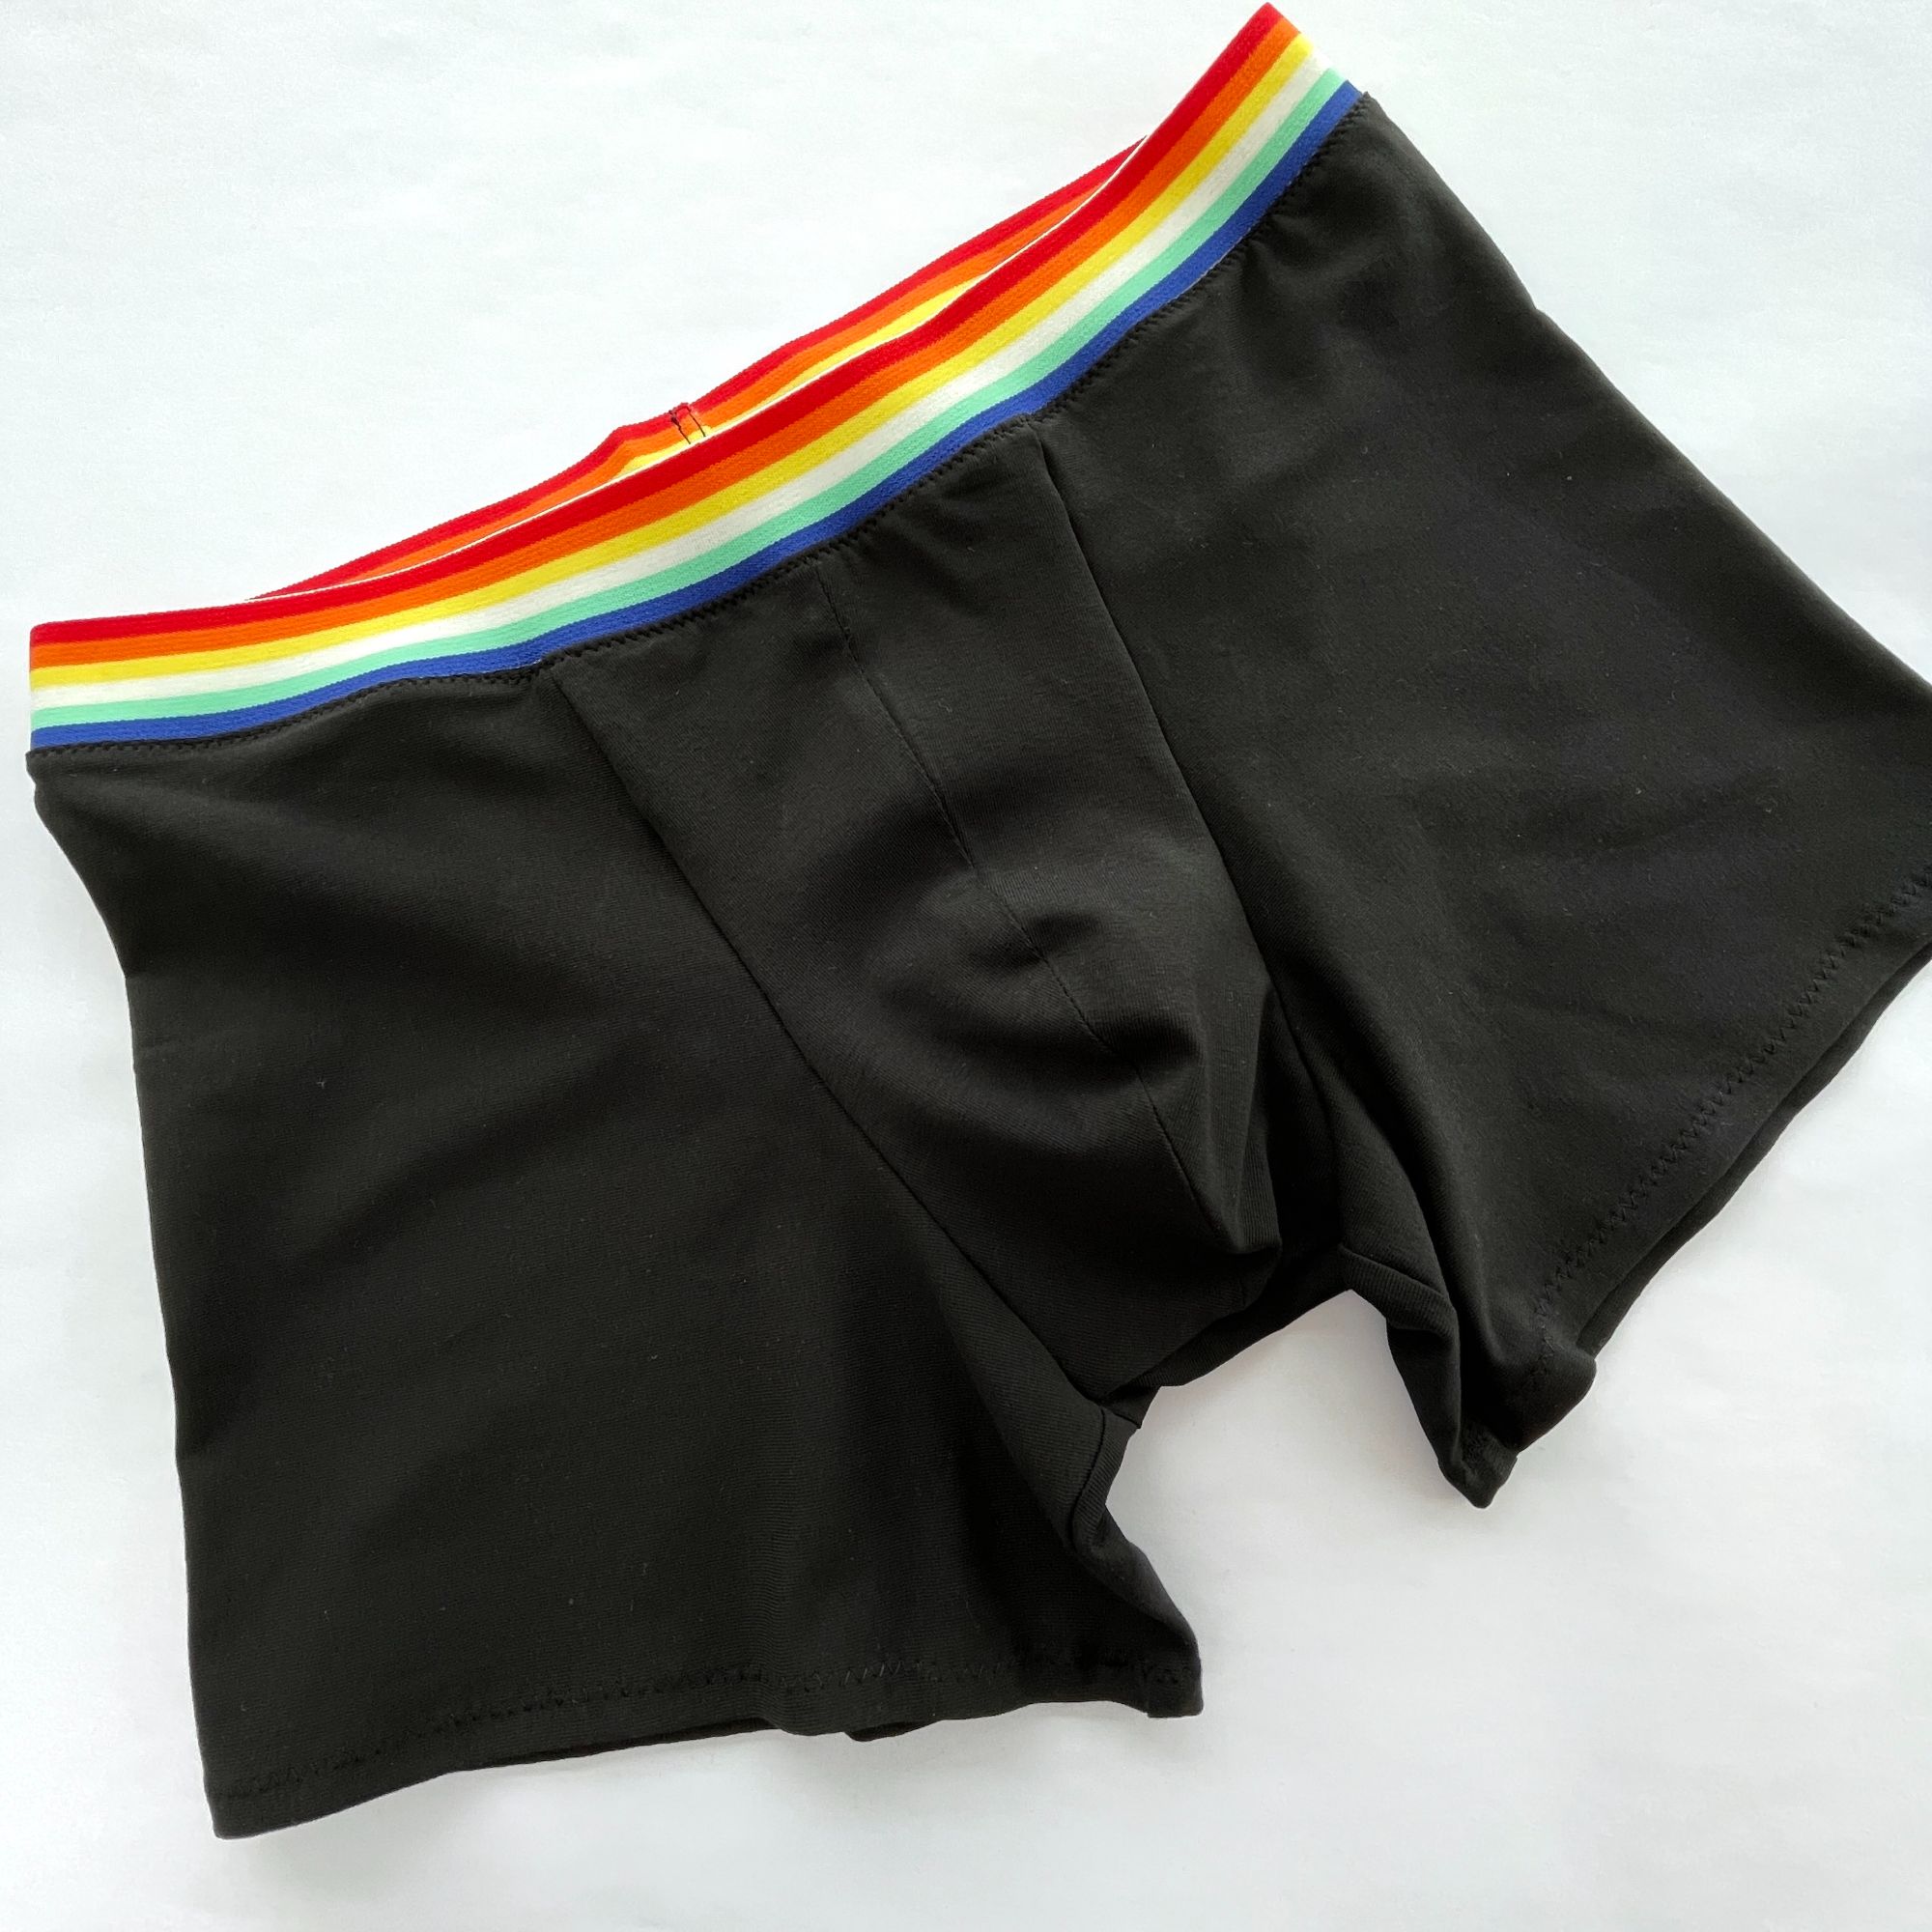 A pair of men's black boxer shorts with rainbow coloured waist elastic. Laid on a white background.